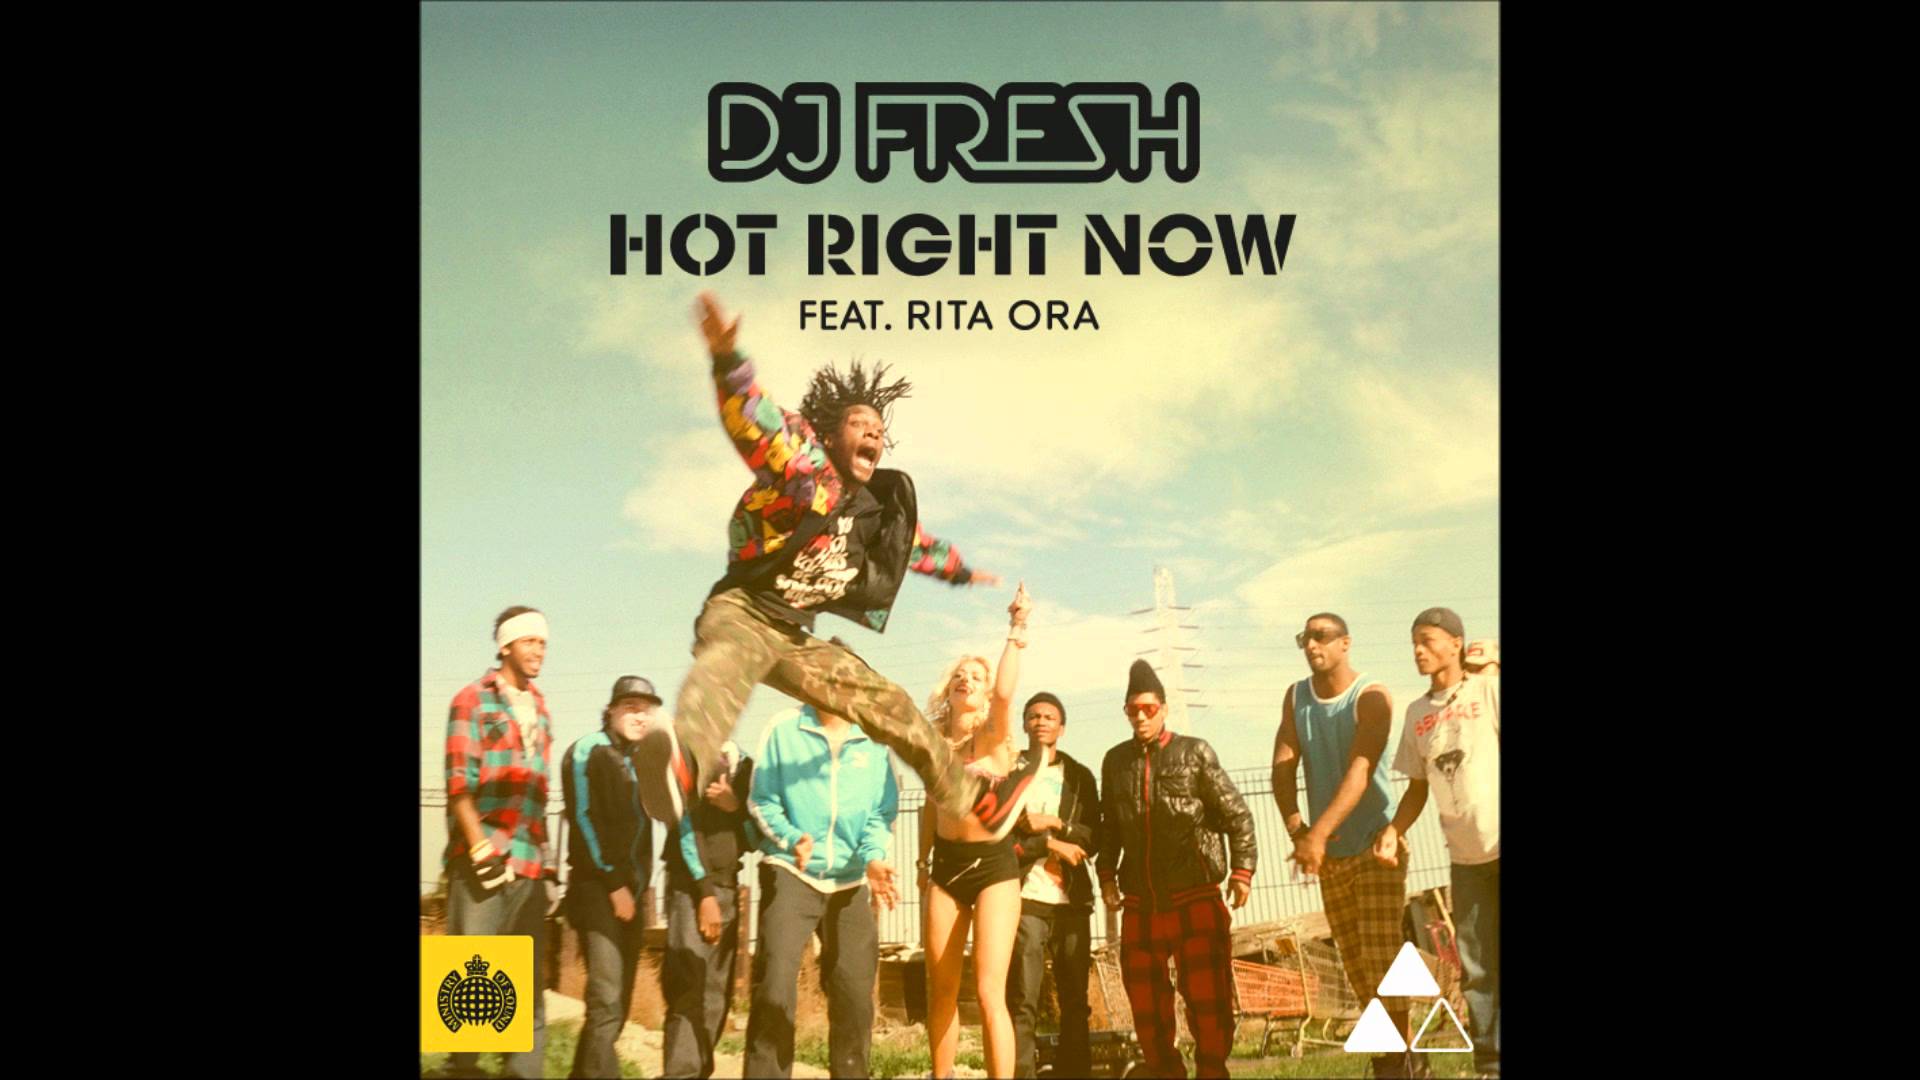 Right now на русский. DJ Fresh & Rita ora. Rita ora hot right Now. Hot right Now. DJ Fresh - hot right Now (Extended Mix).